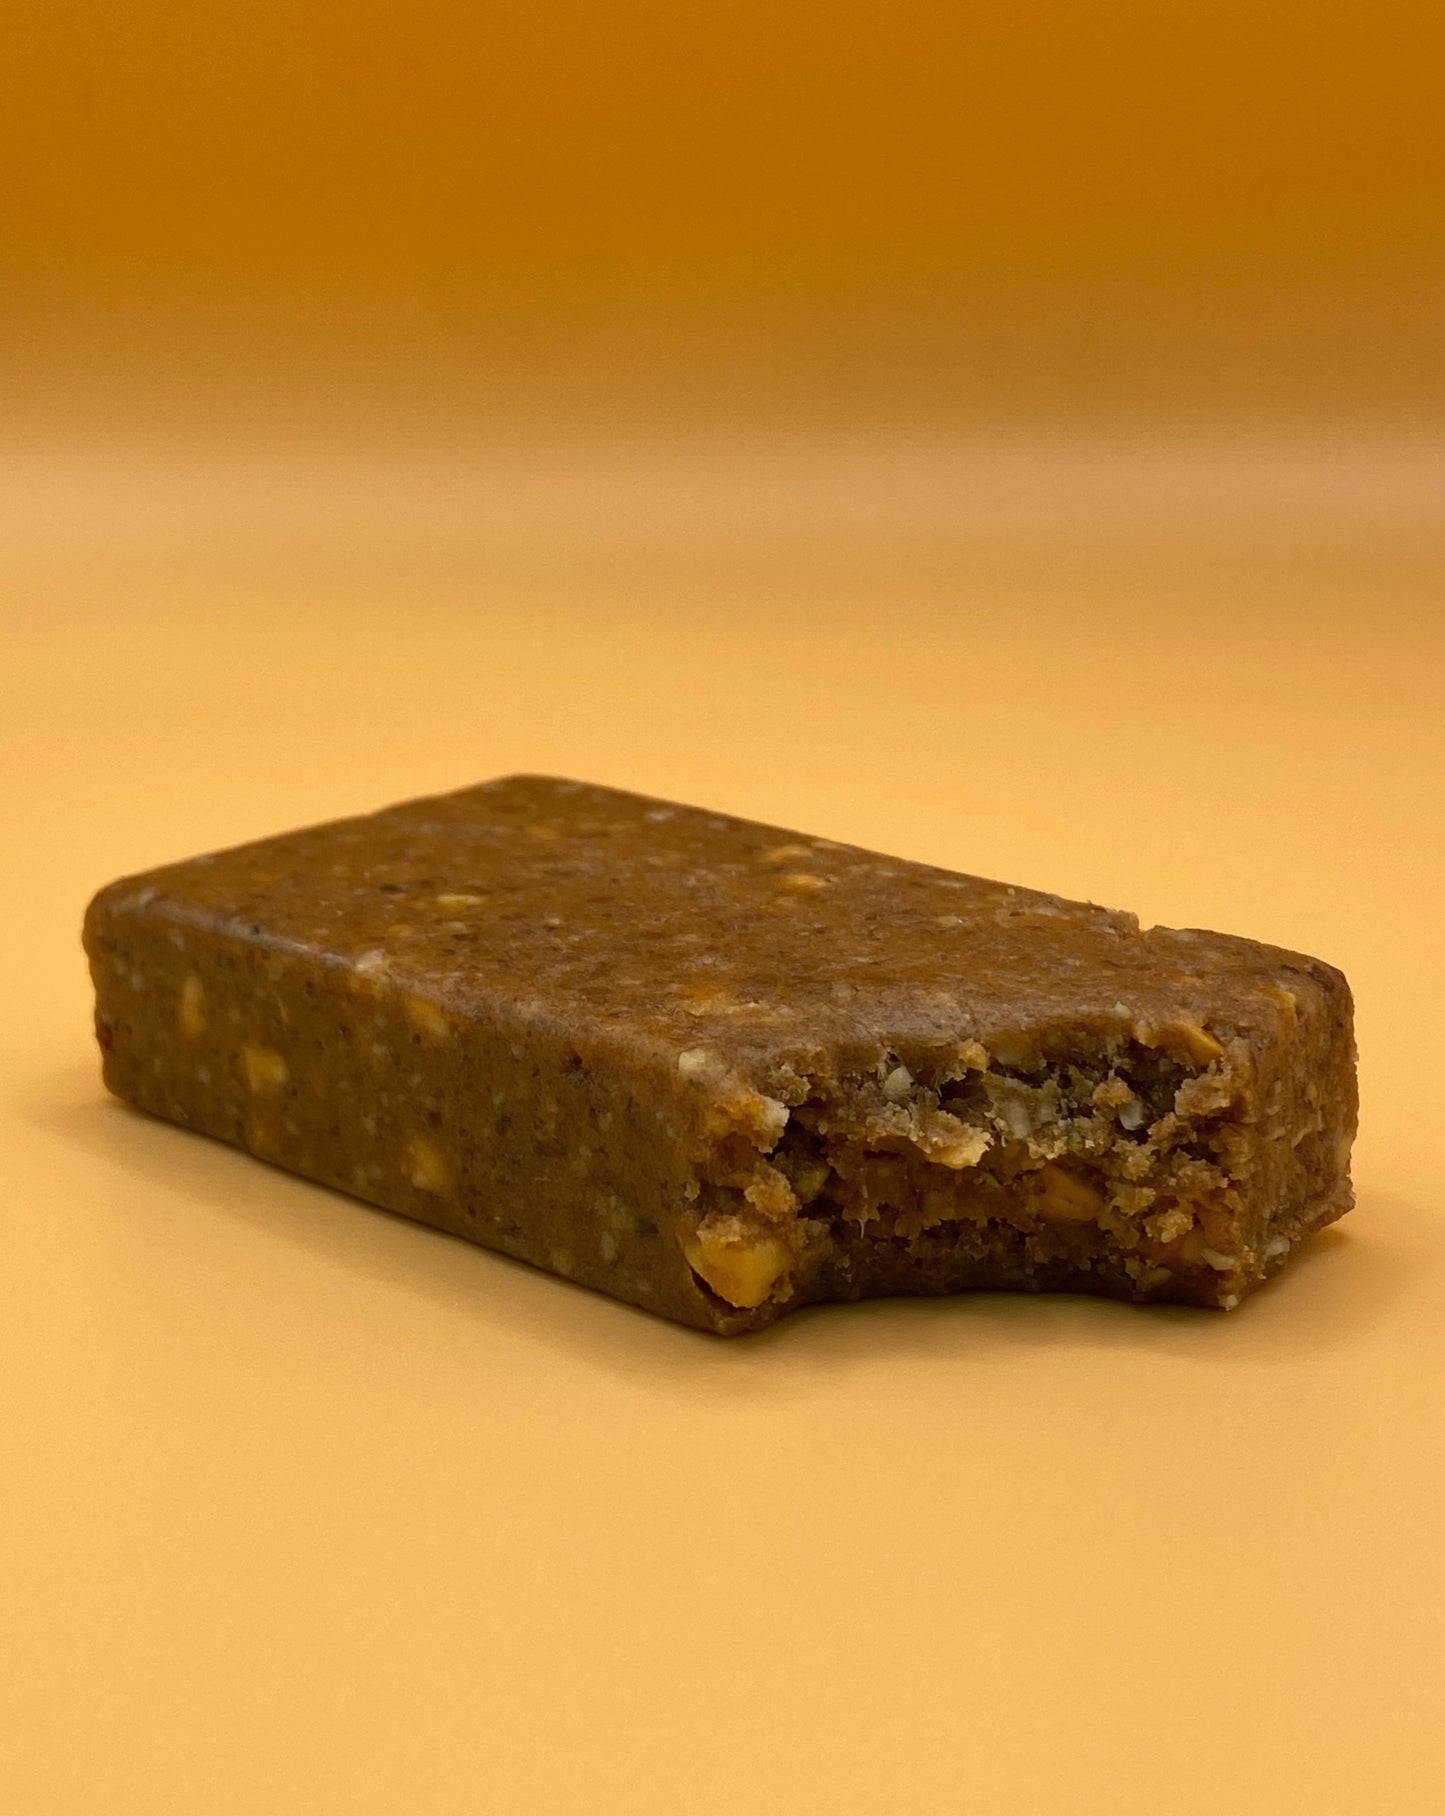 A salted peanut TIROBAR, a vegan and all natural protein bar, is shown bitten with peanuts visible in the filling. The bar is placed against an orange background.